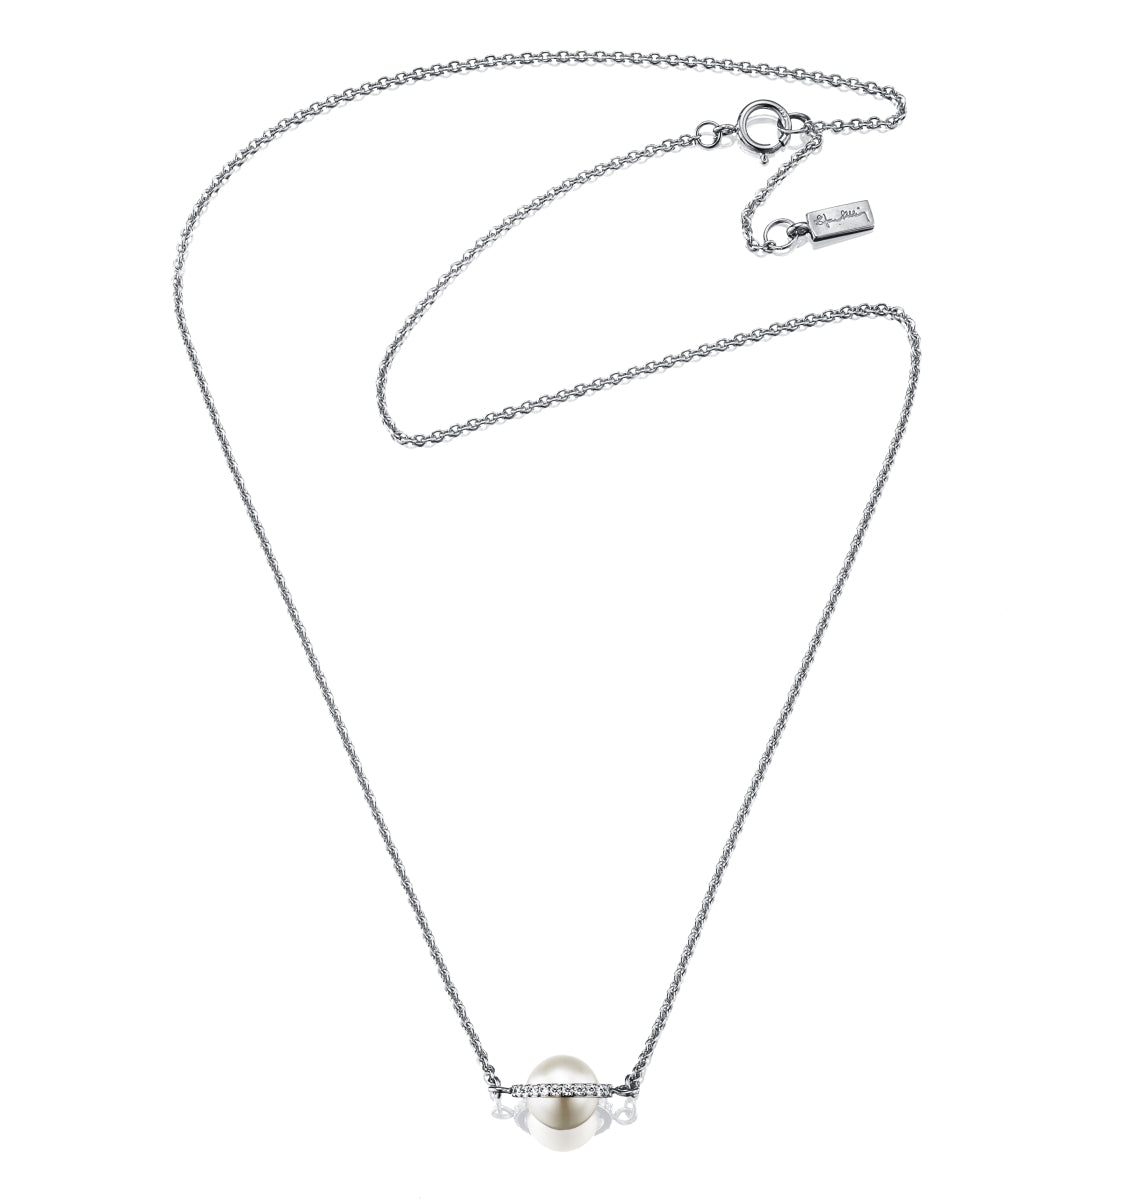 Day Pearl & Stars Necklace White Gold